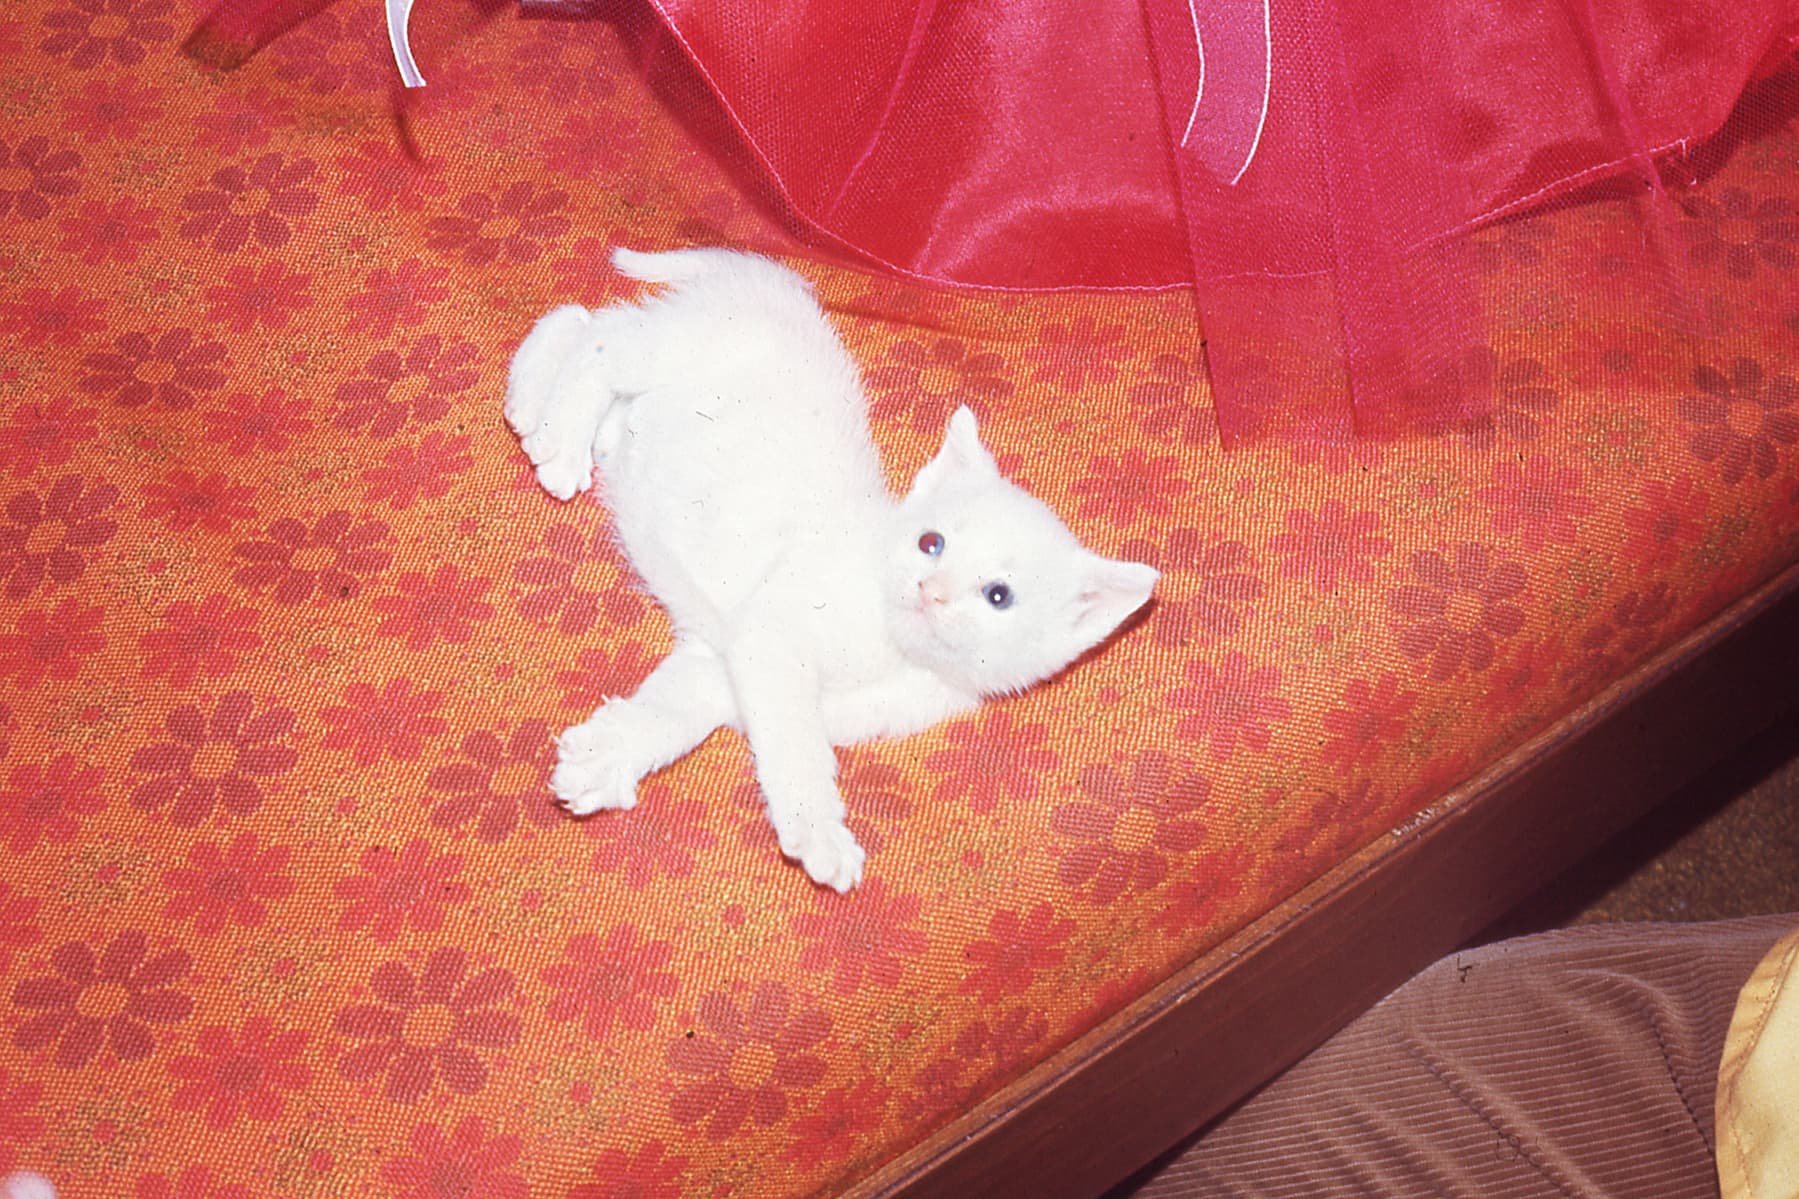 A white kitten lounges on a patterned mattress